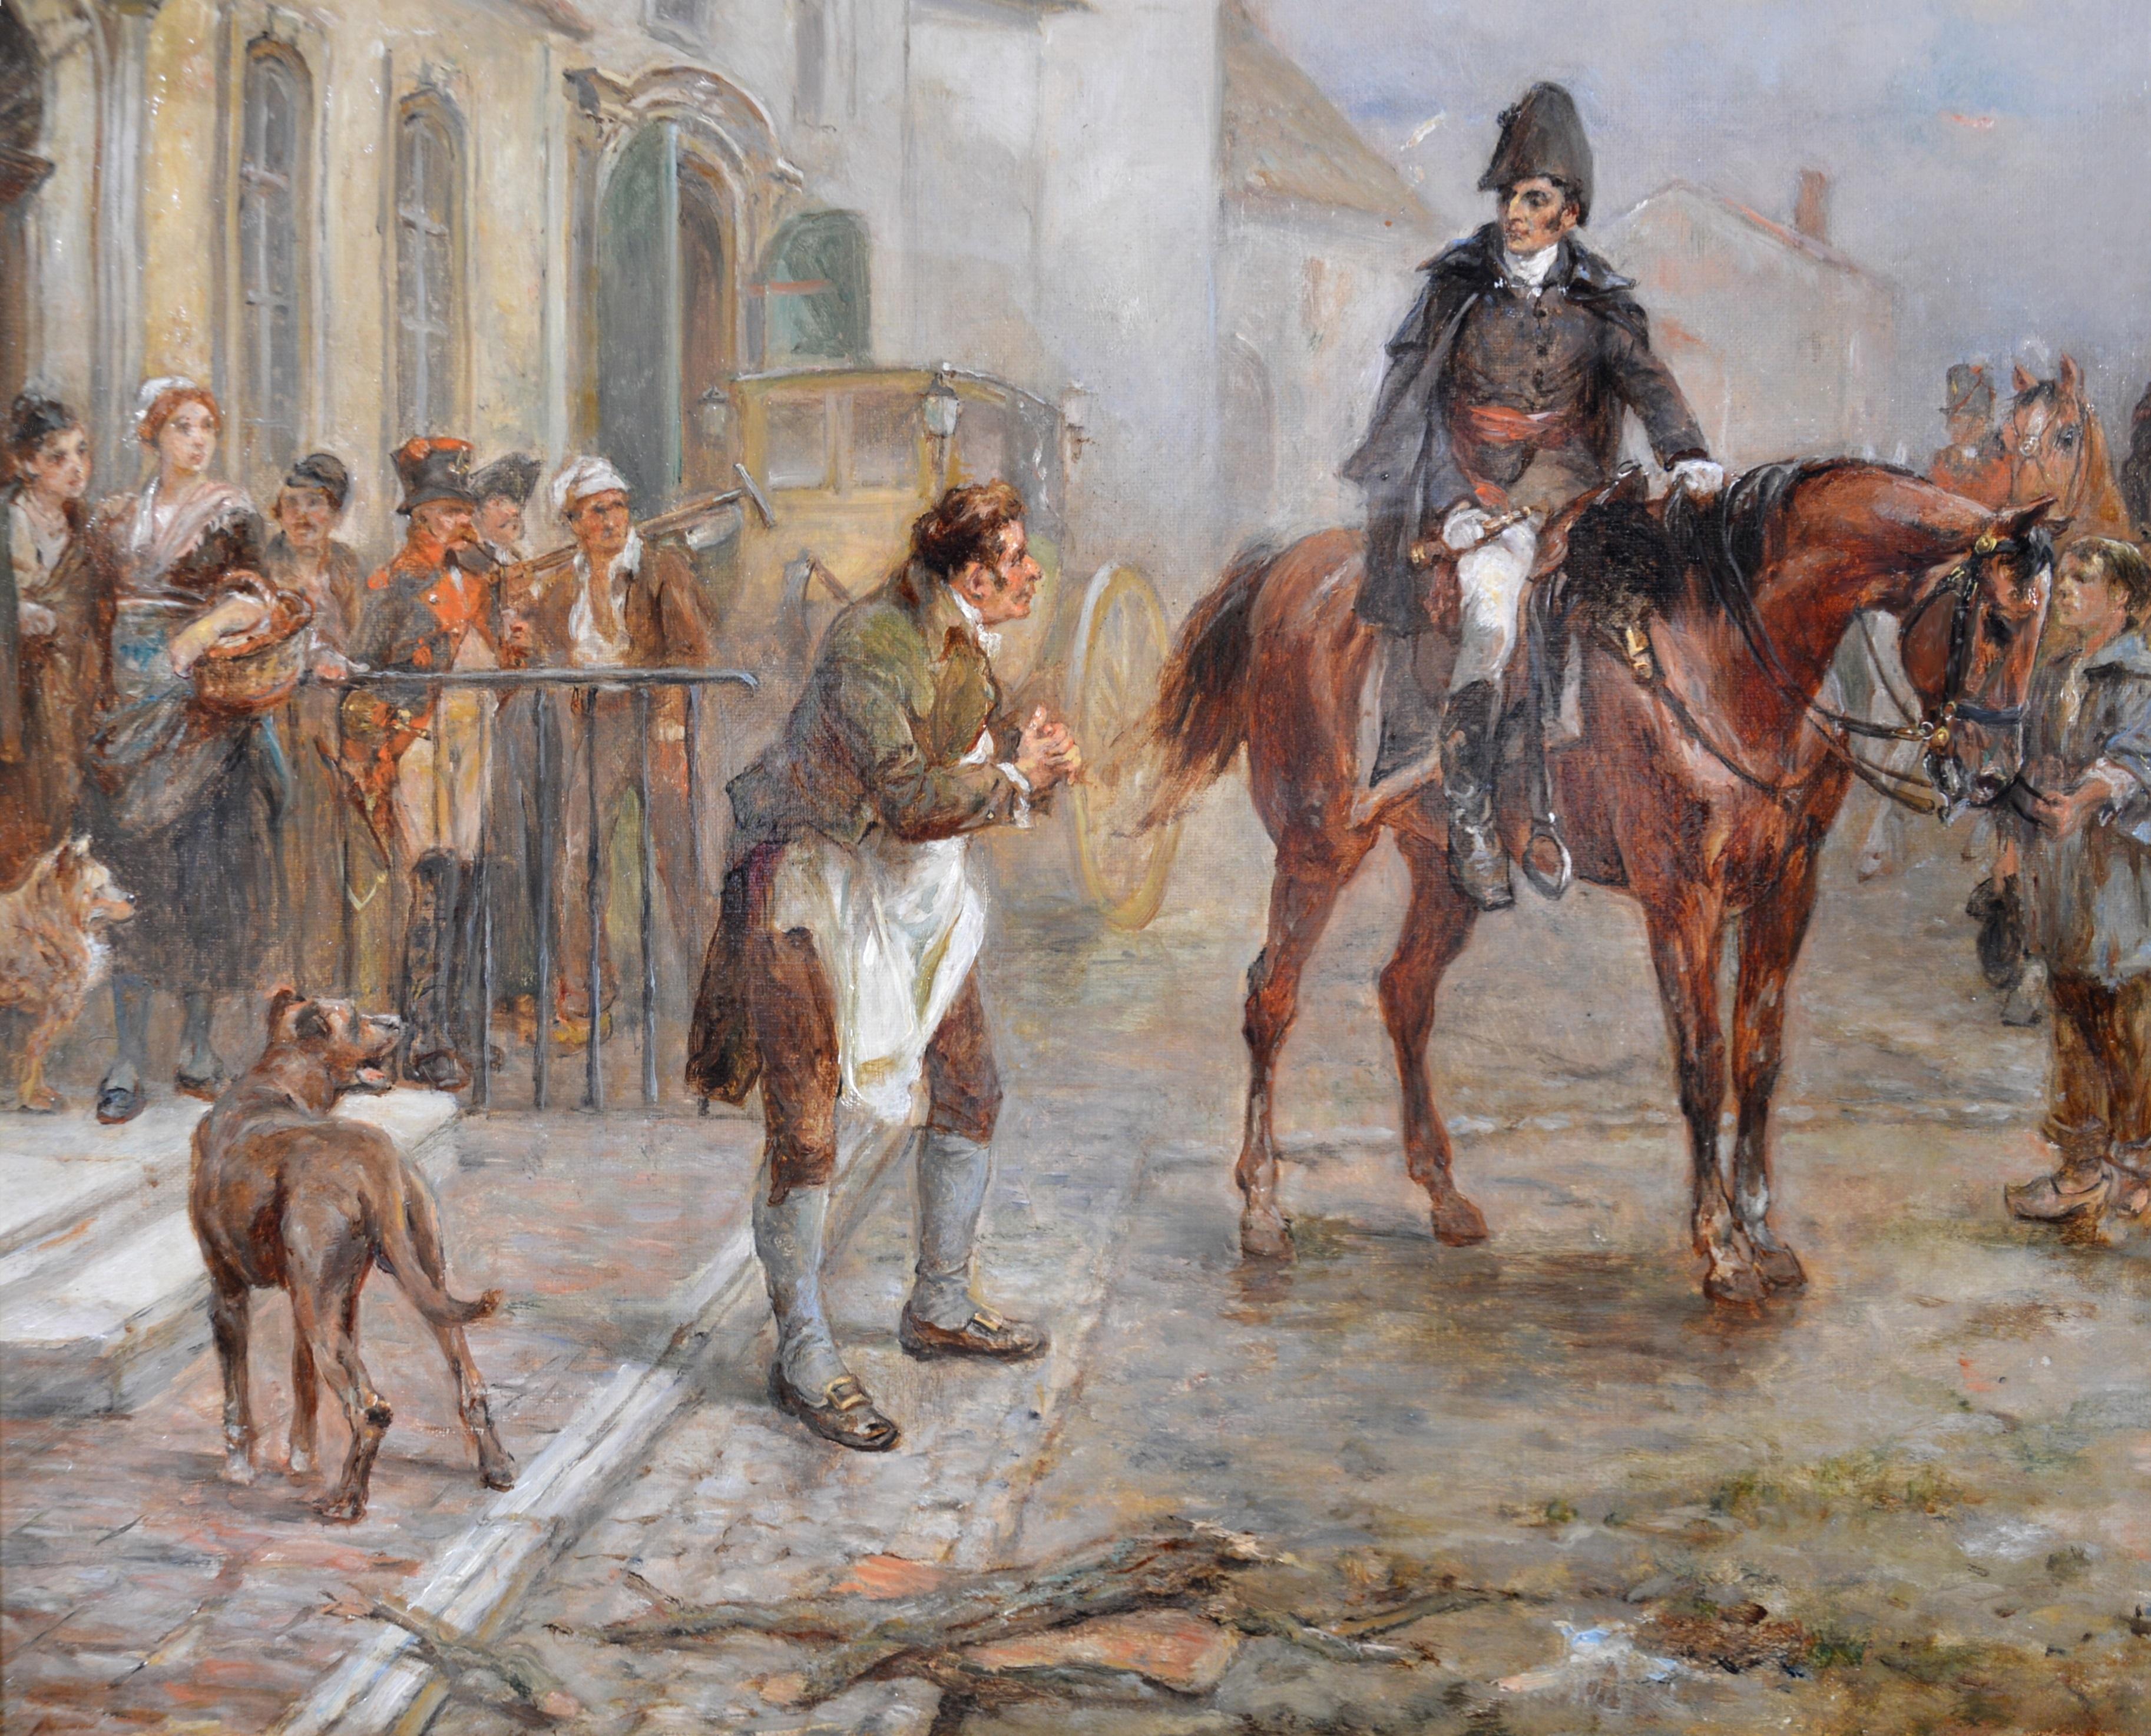 ‘Wellington before Waterloo’ by Robert Alexander Hillingford (1828-1904). 

The painting – which depicts the Duke of Wellington astride his charger Copenhagen talking to an innkeeper whilst Life Guards water their horses – is signed by the artist